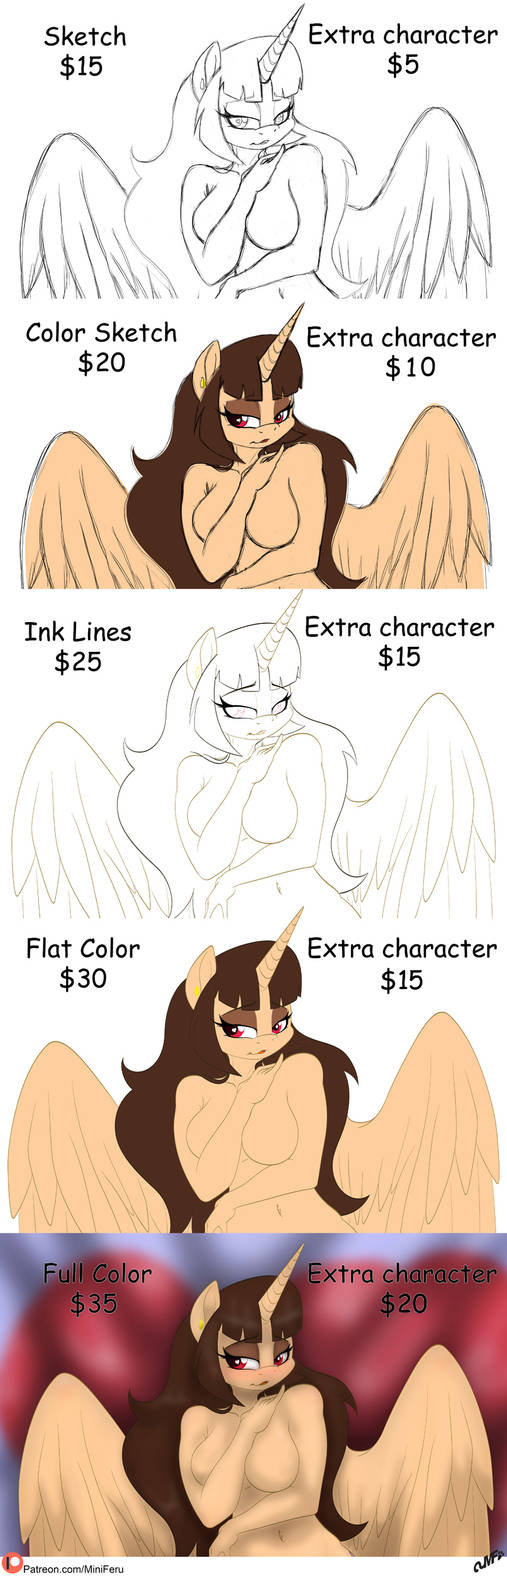 Commission Info (Update 02/17/20)